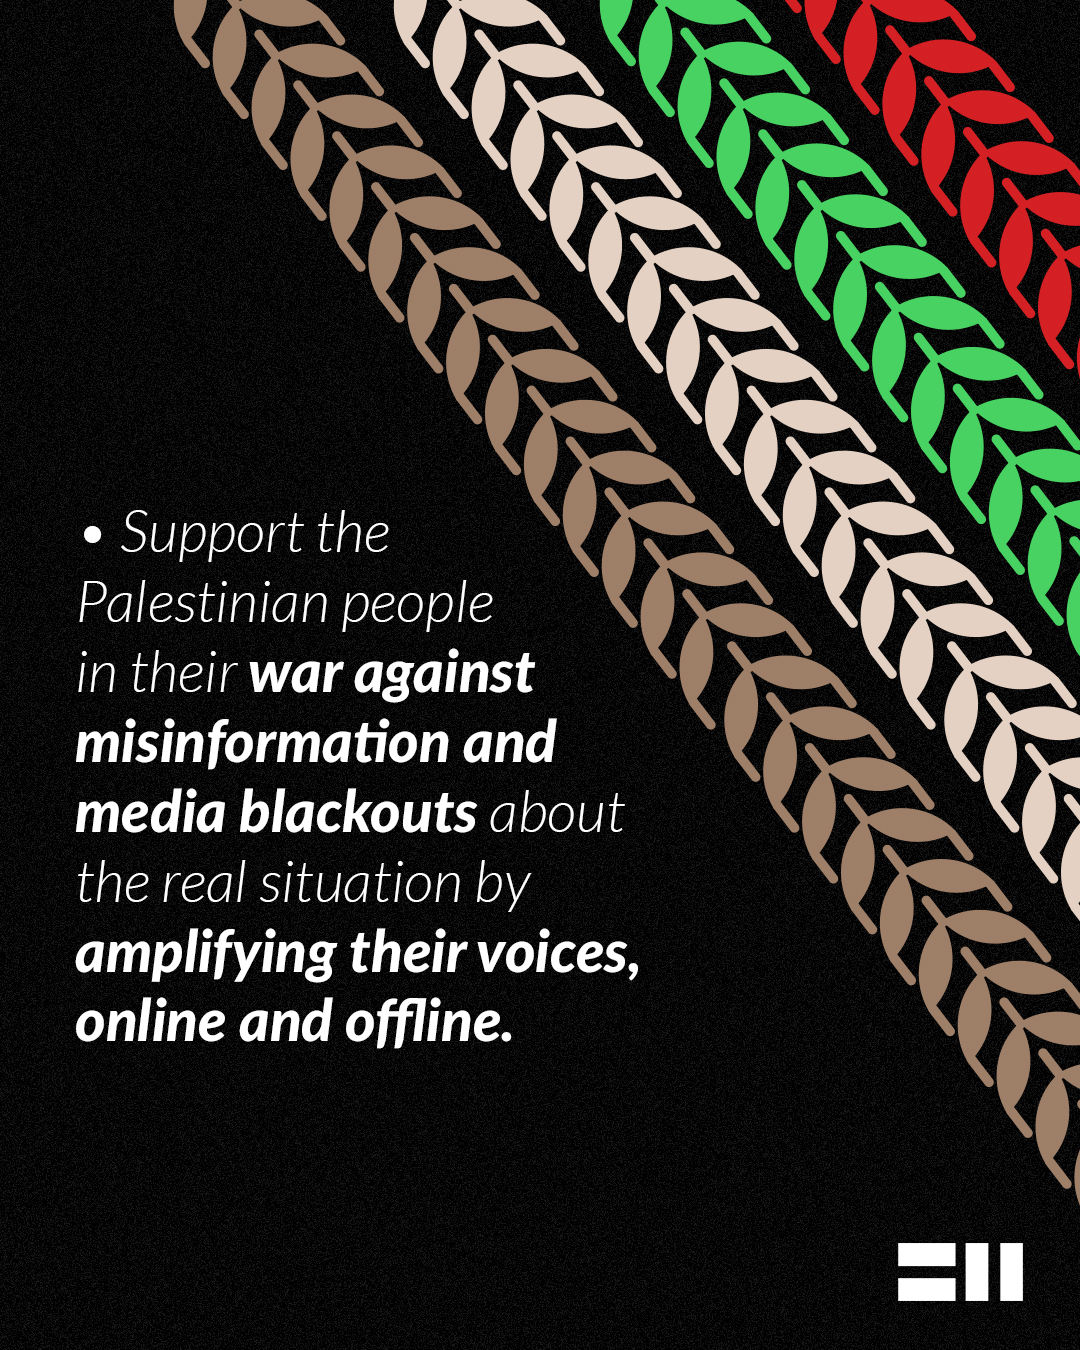 Support the Palestinian people in their war against misinformation and media blackouts about the real situation by amplifying their voices, online and offline.